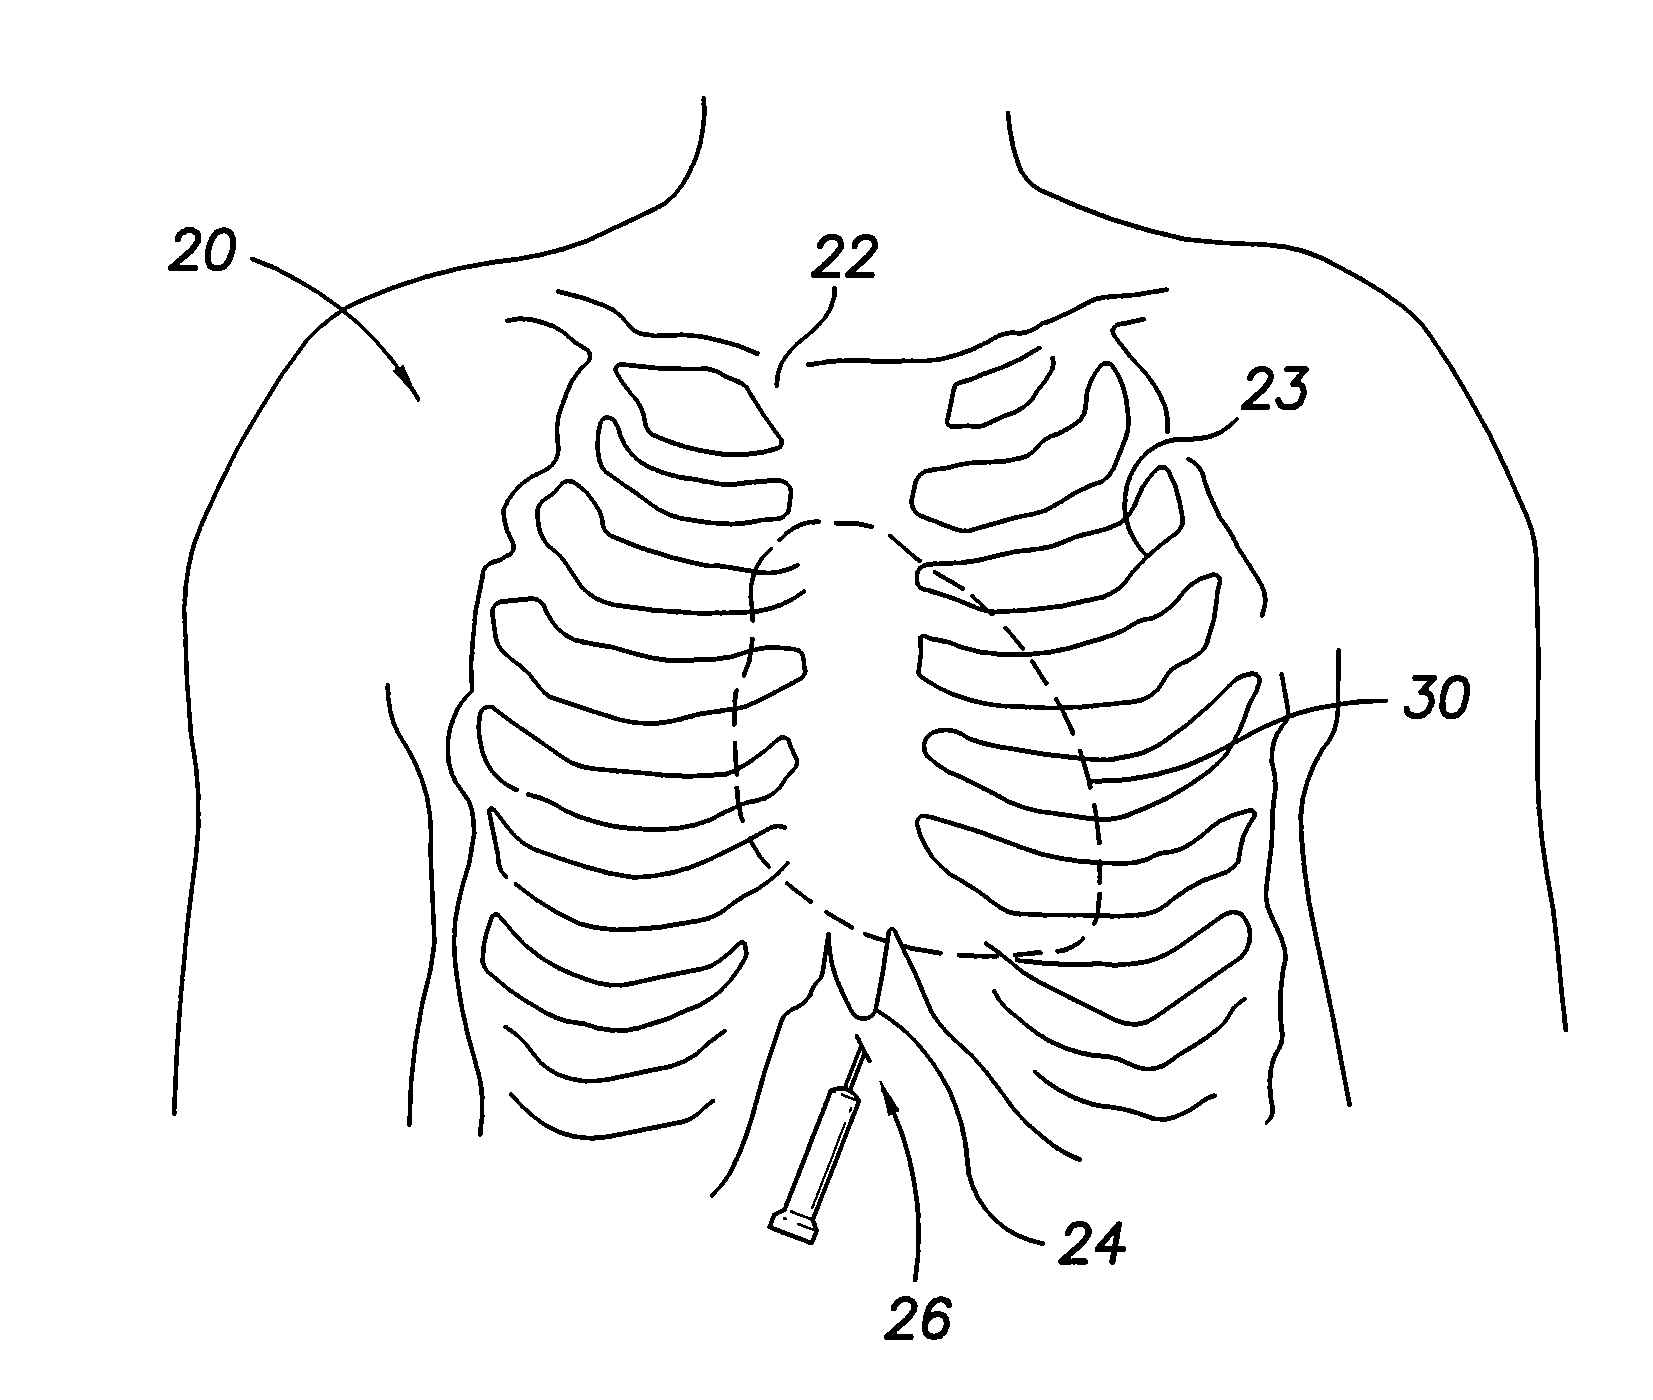 Intra-pericardial medical device